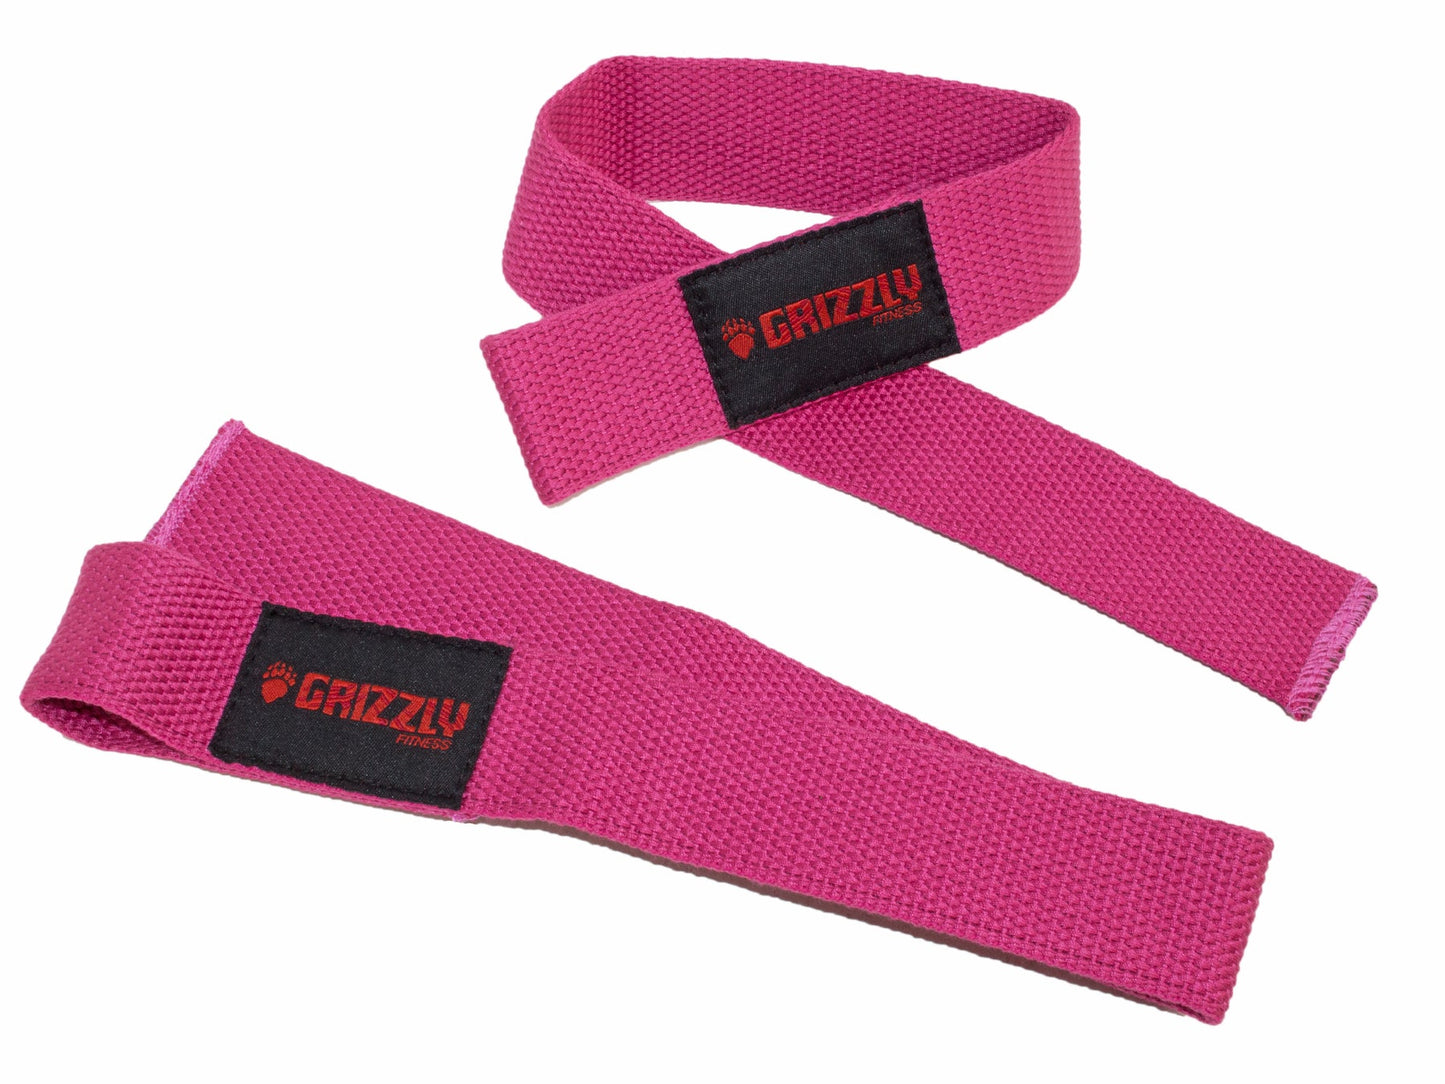 Grizzly Fitness Cotton Lifting Straps